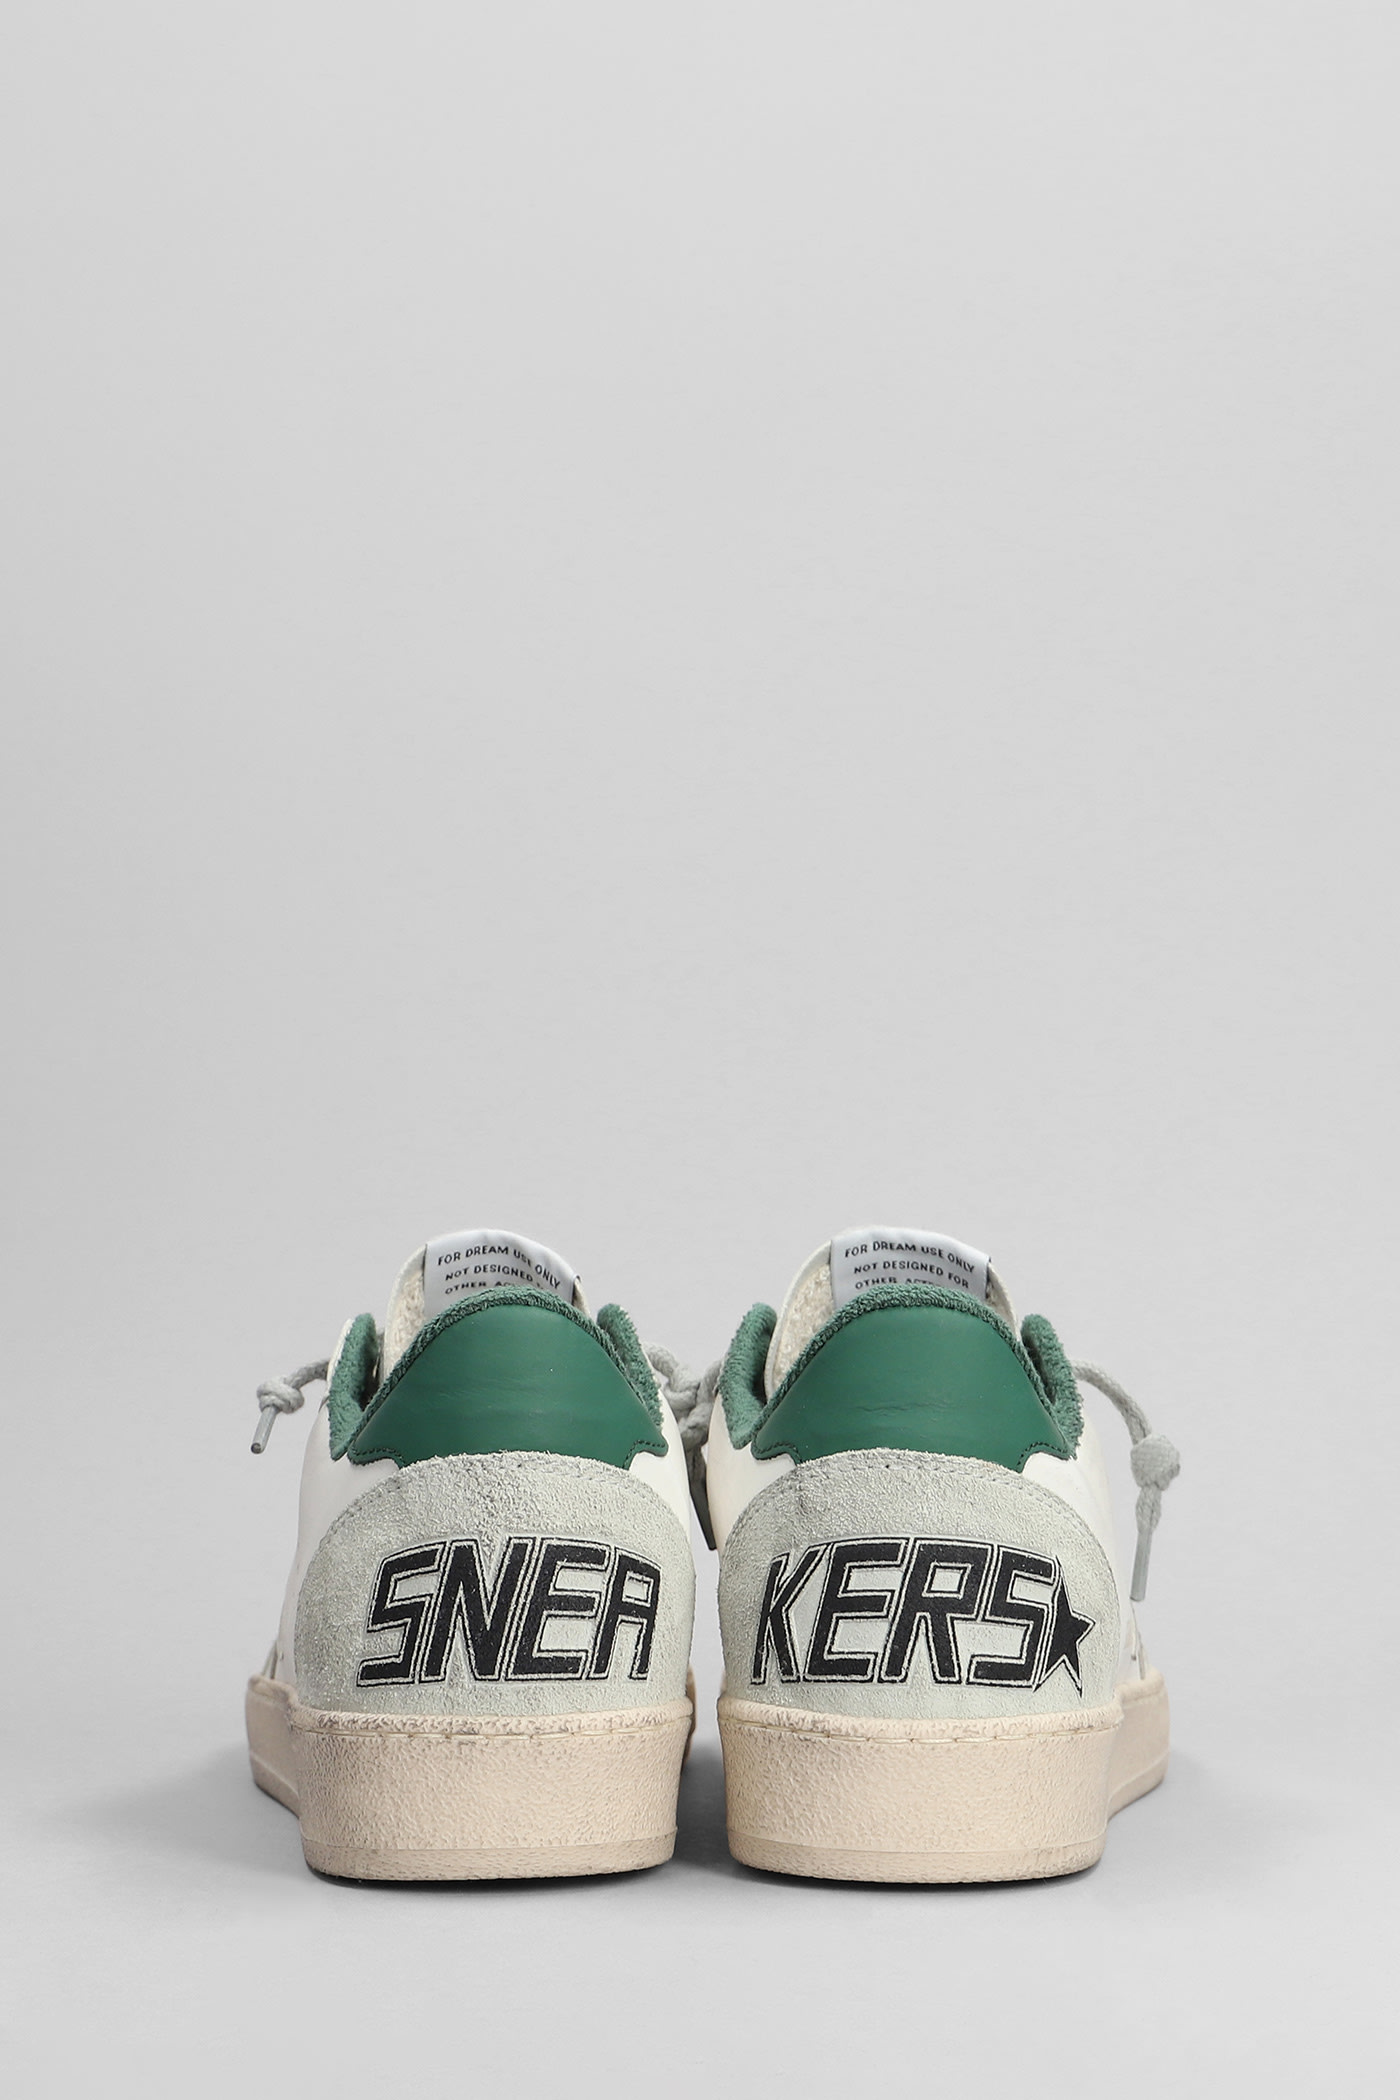 Shop Golden Goose Ball Star Sneakers In White Suede And Leather